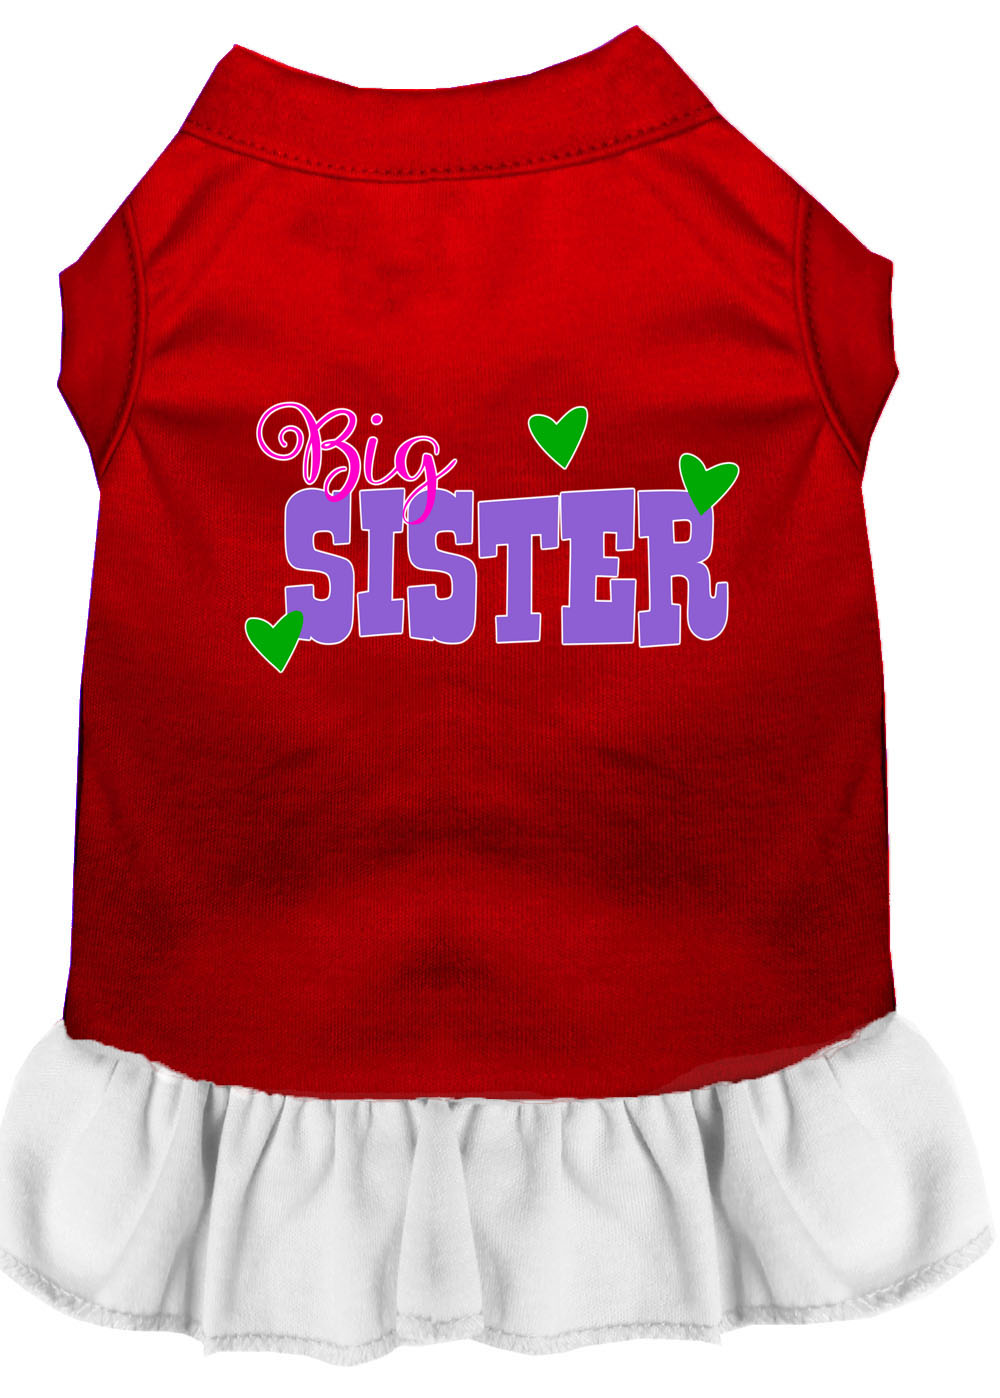 Big Sister Screen Print Dog Dress Red with White Med